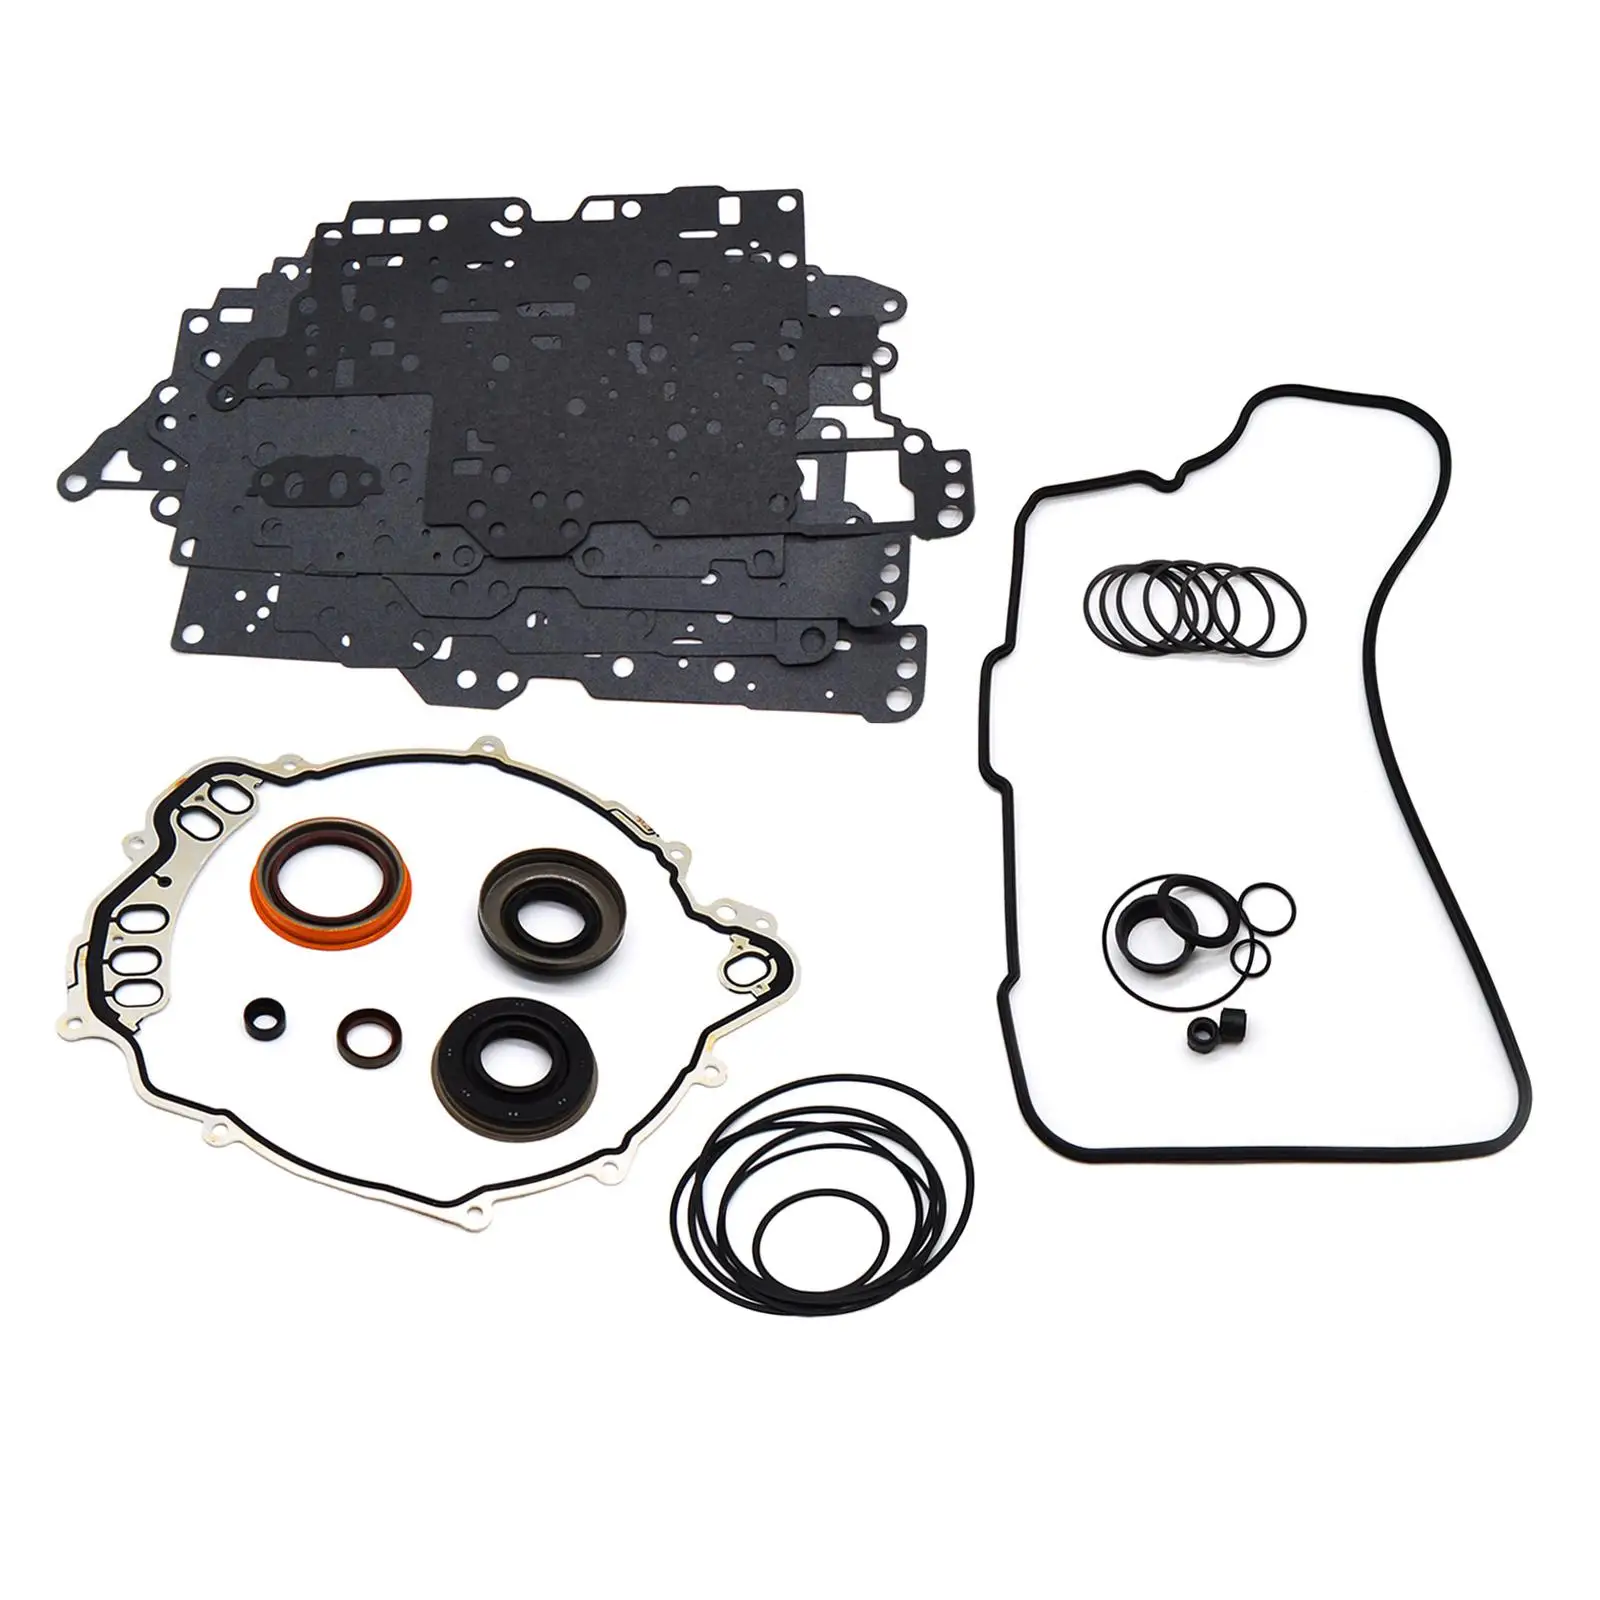 6T70 6T75 Auto Transmission Master Rebuild Kit Assembly Minor Repair Kit for Cadillac T19600A Accessories Car Supplies